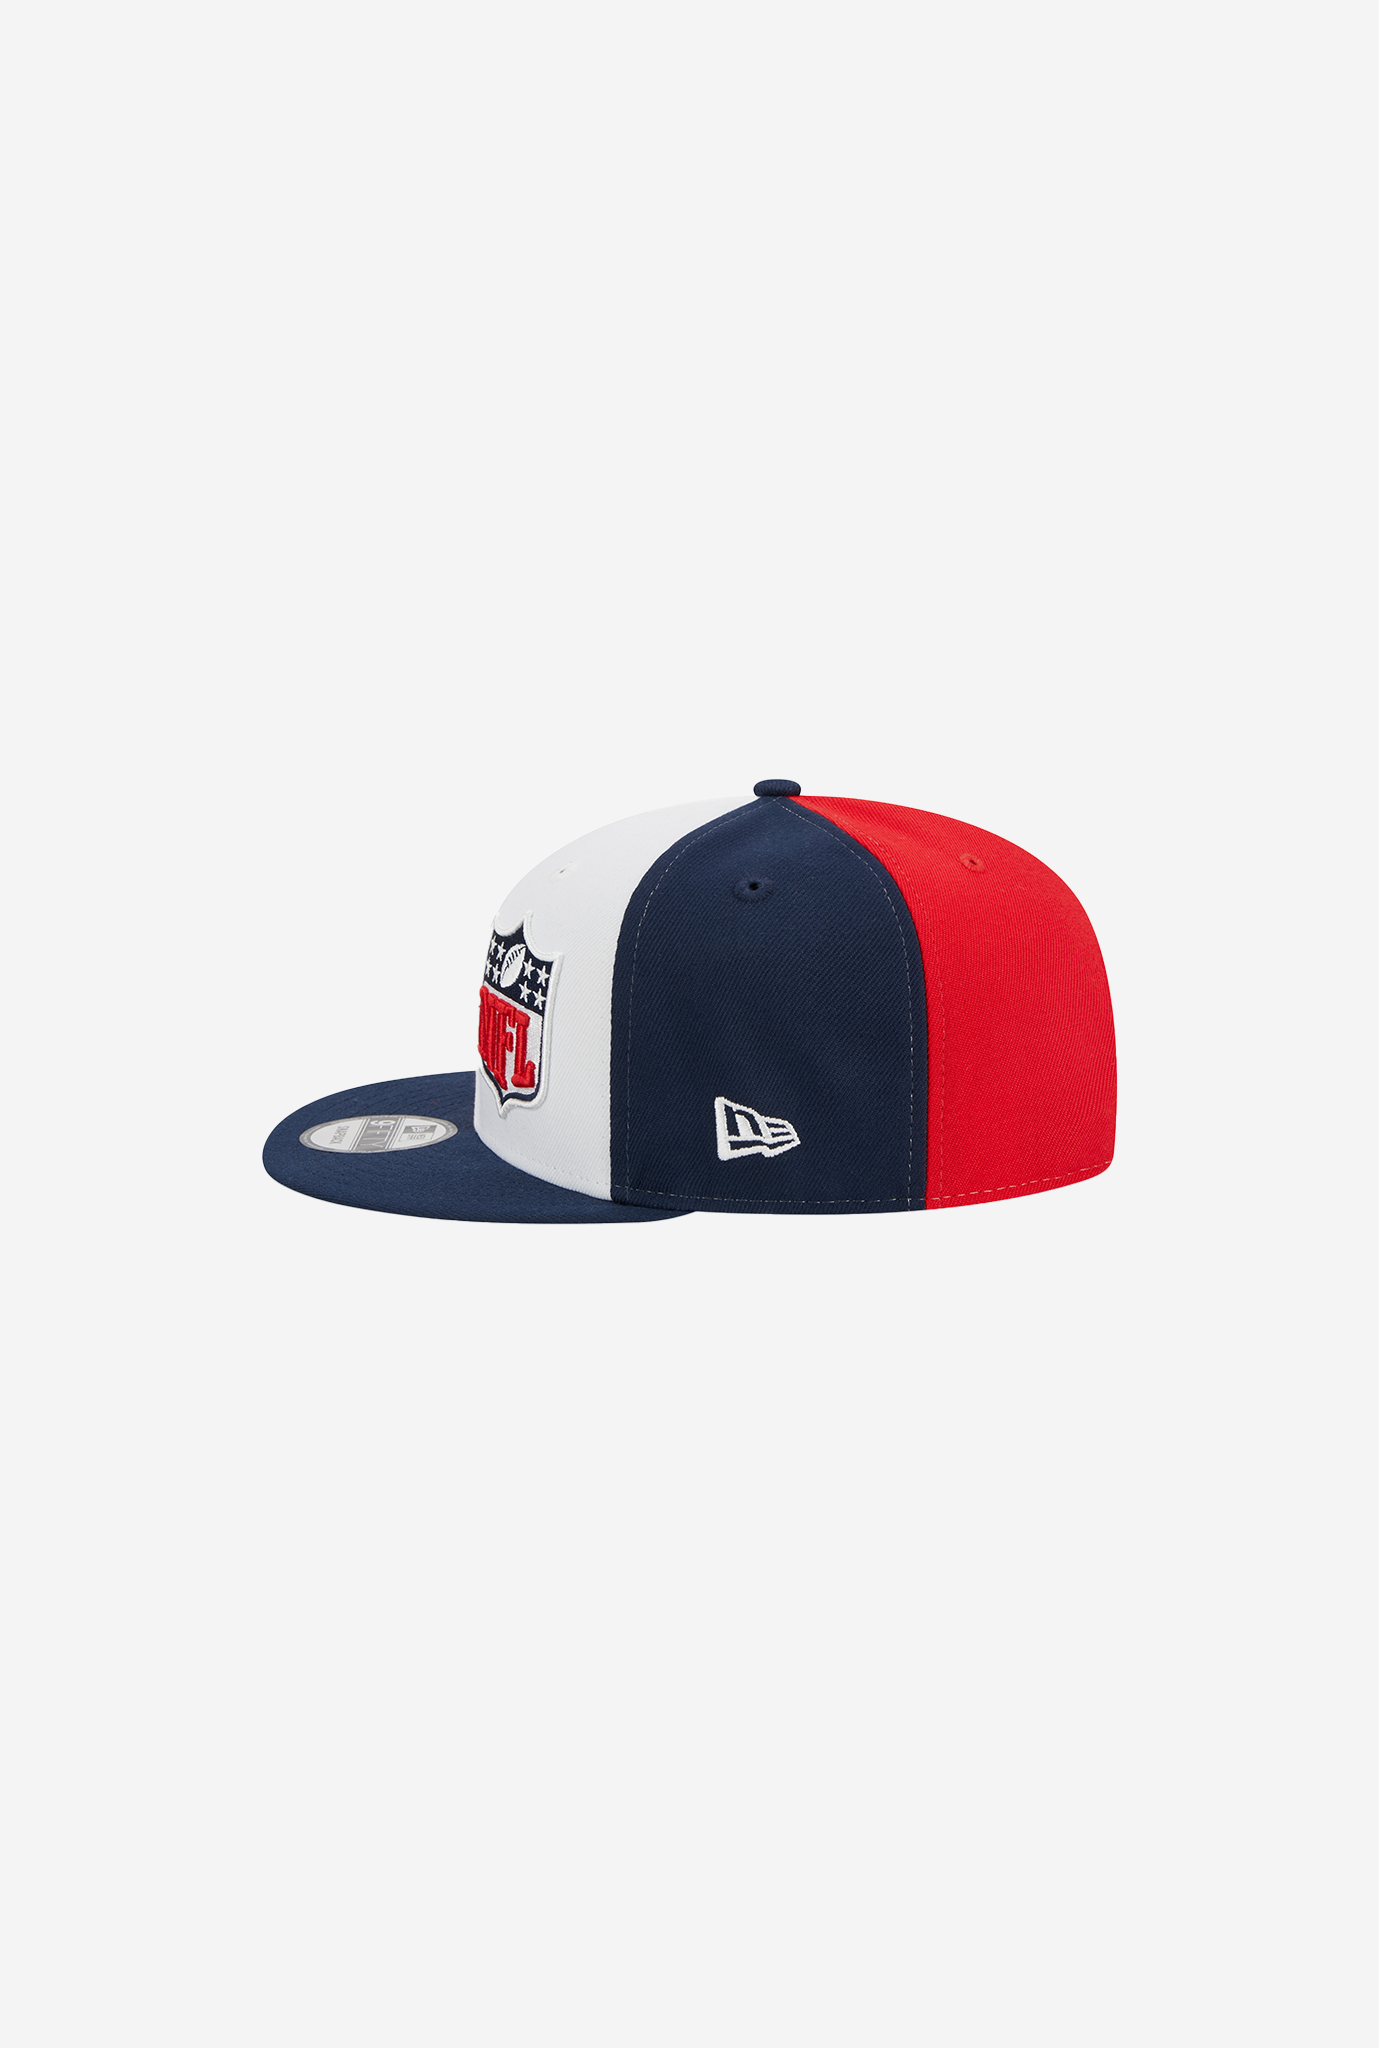 New England Patriots NFL Sideline 23 9FIFTY